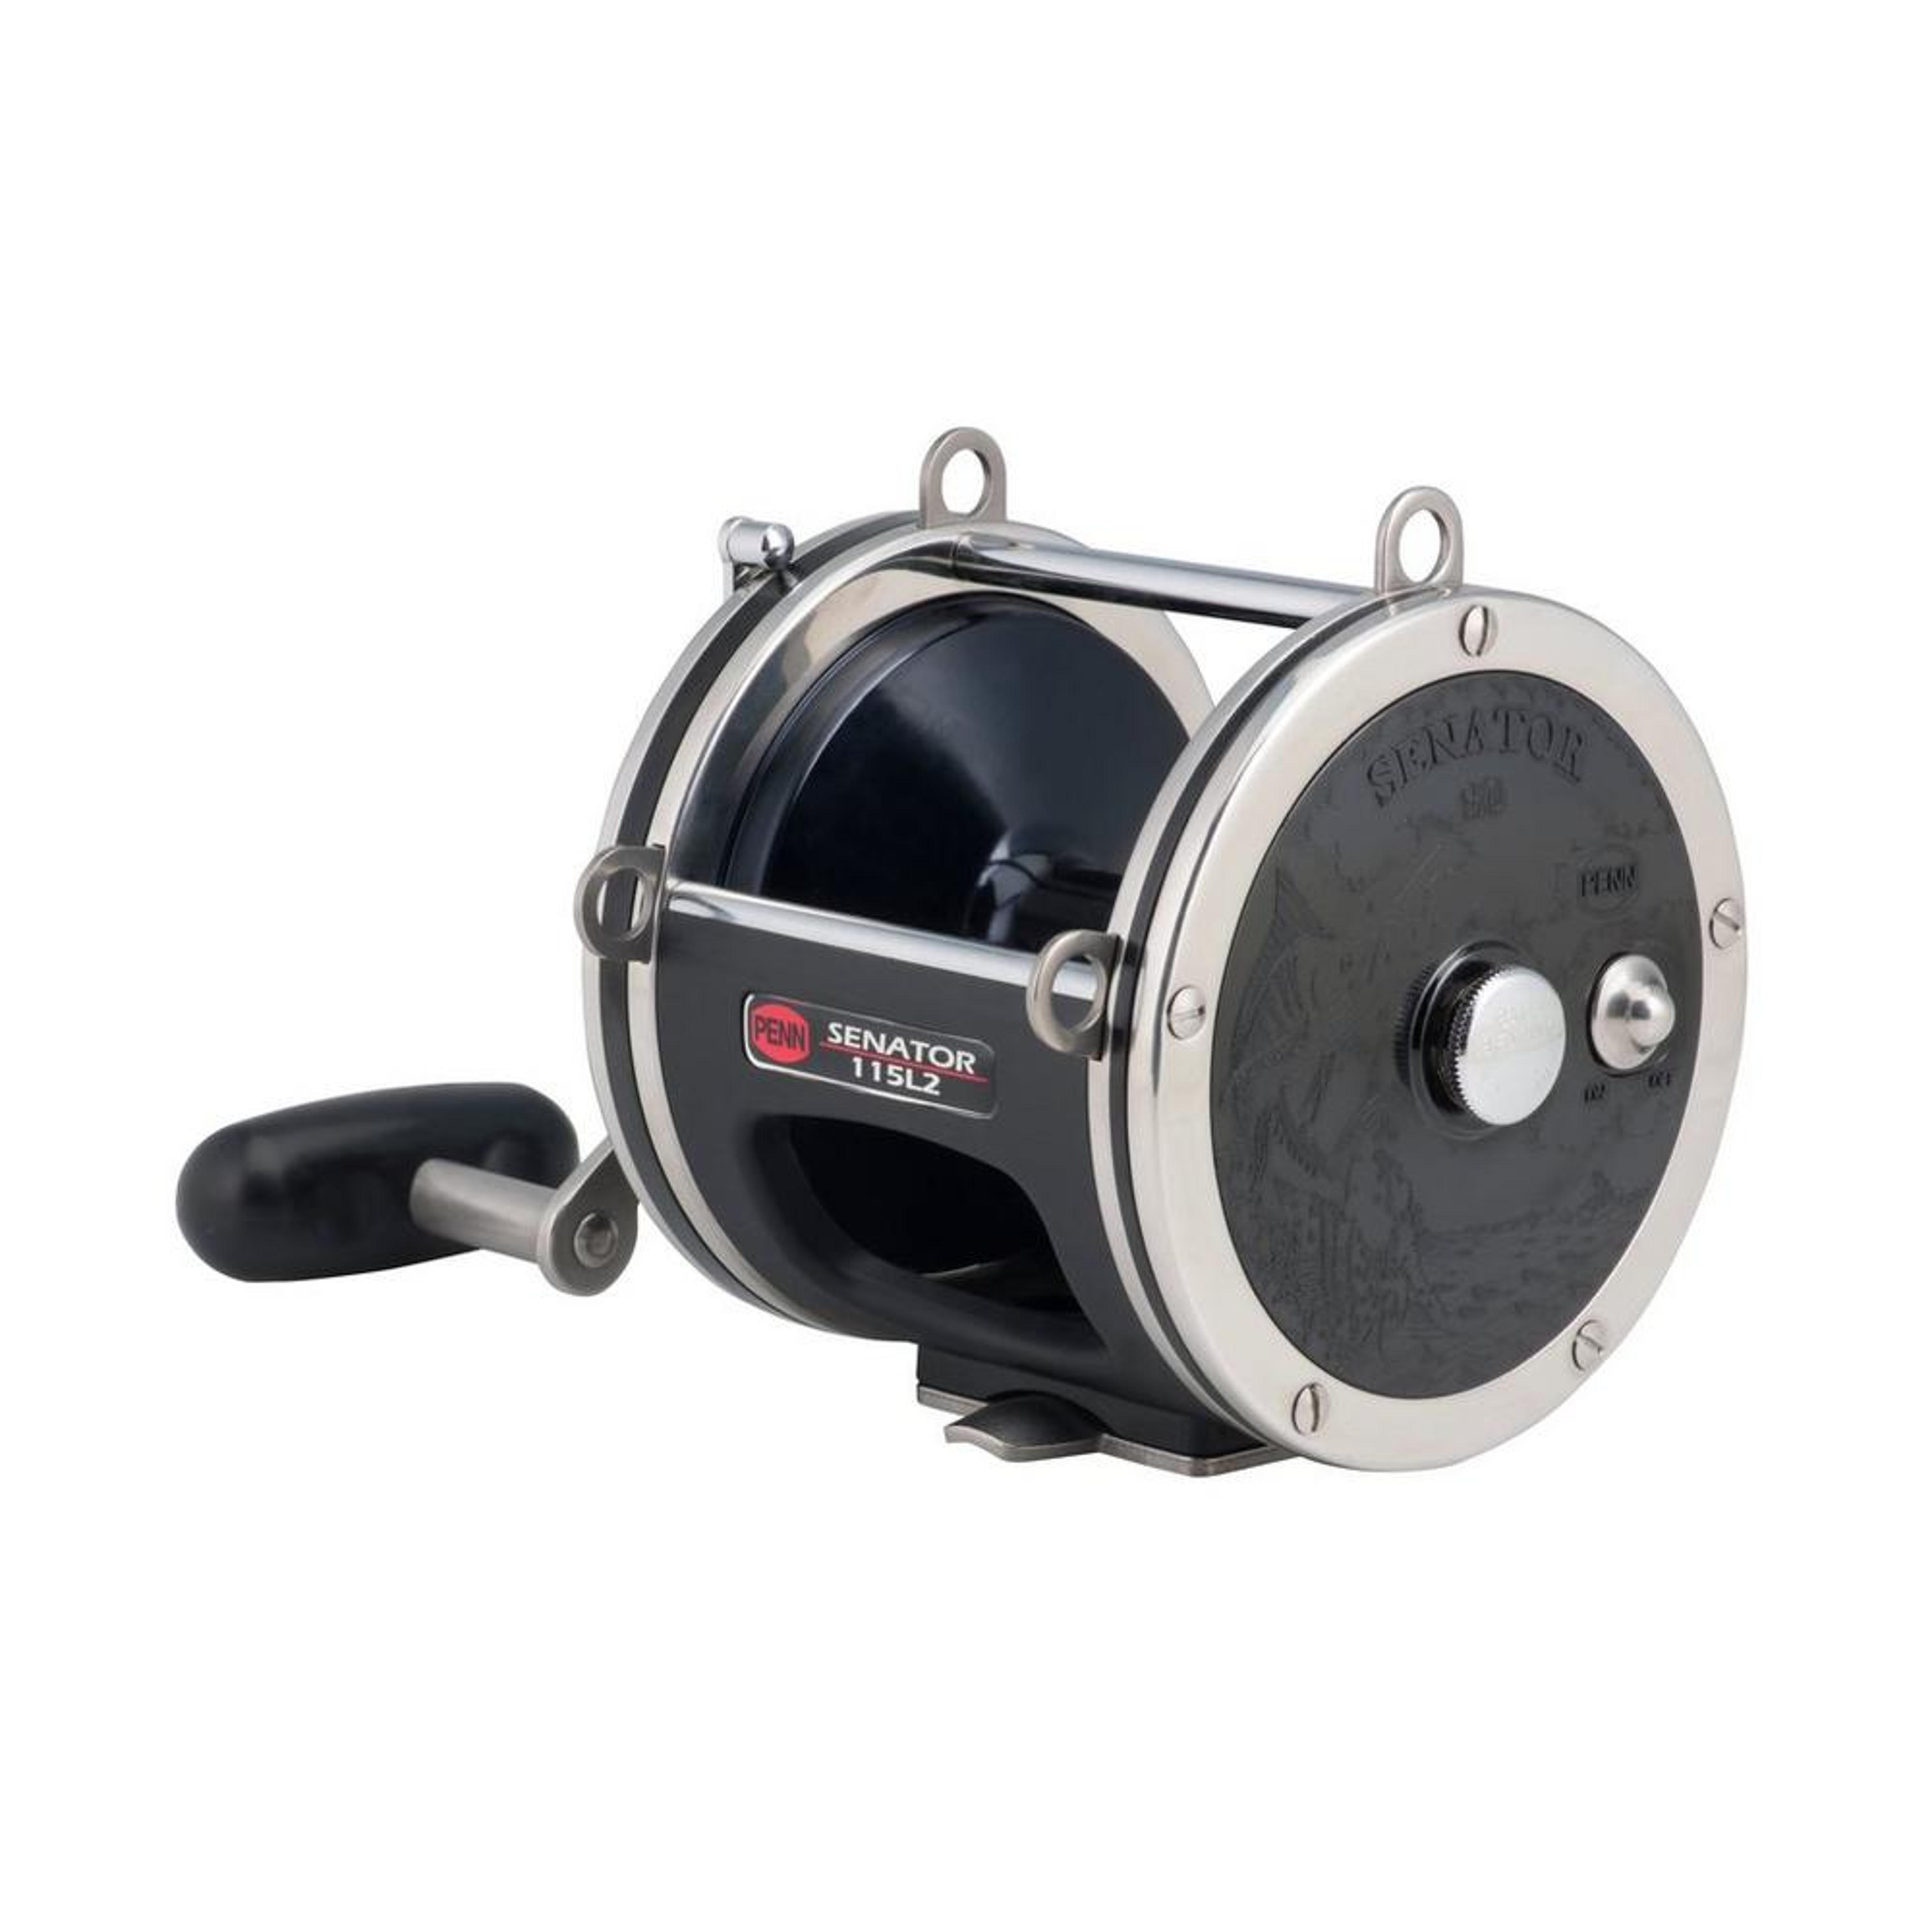 Kogha All-round reel Avantax at low prices